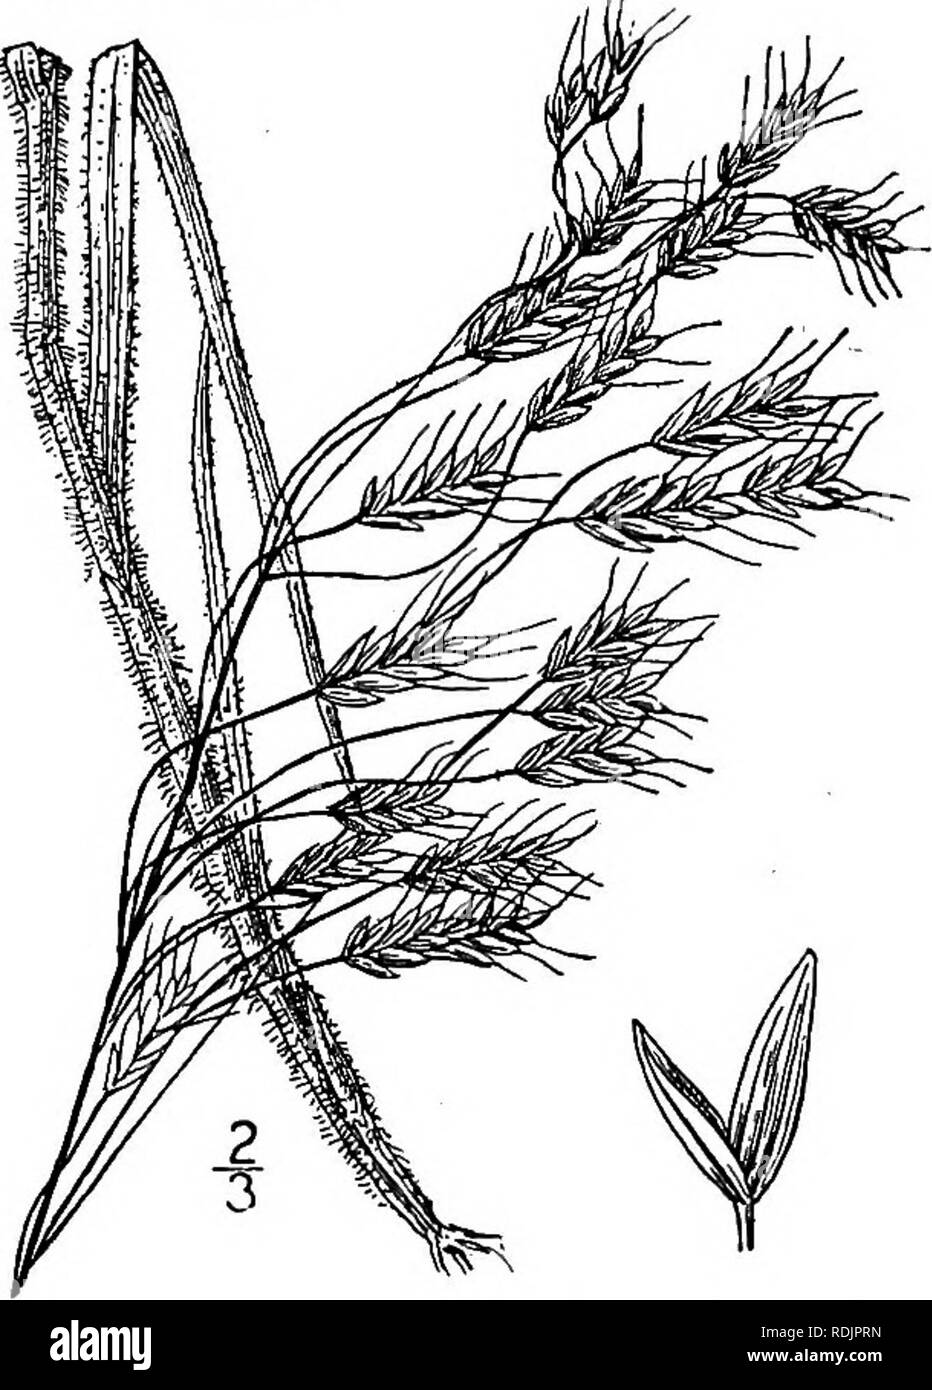 . An illustrated flora of the northern United States, Canada and the British possessions, from Newfoundland to the parallel of the southern boundary of Virginia, and from the Atlantic Ocean westward to the 102d meridian. Botany; Botany. Culms i°-ii° tall. Sheaths softly pubescent; blades up to 6' long and about 2&quot; broad, pubescent; panicle S'-8' long, diffuse, somewhat drooping;, spikelets drooping, on slender pedicels, lanceolate, io&quot;-I2&quot; long, about 2.&quot; broad, glabrous, the first scale 3-nerved, the second one 5-nerved, the flowering scales 9-nerved, 3i&quot;-4i&quot; lo Stock Photo